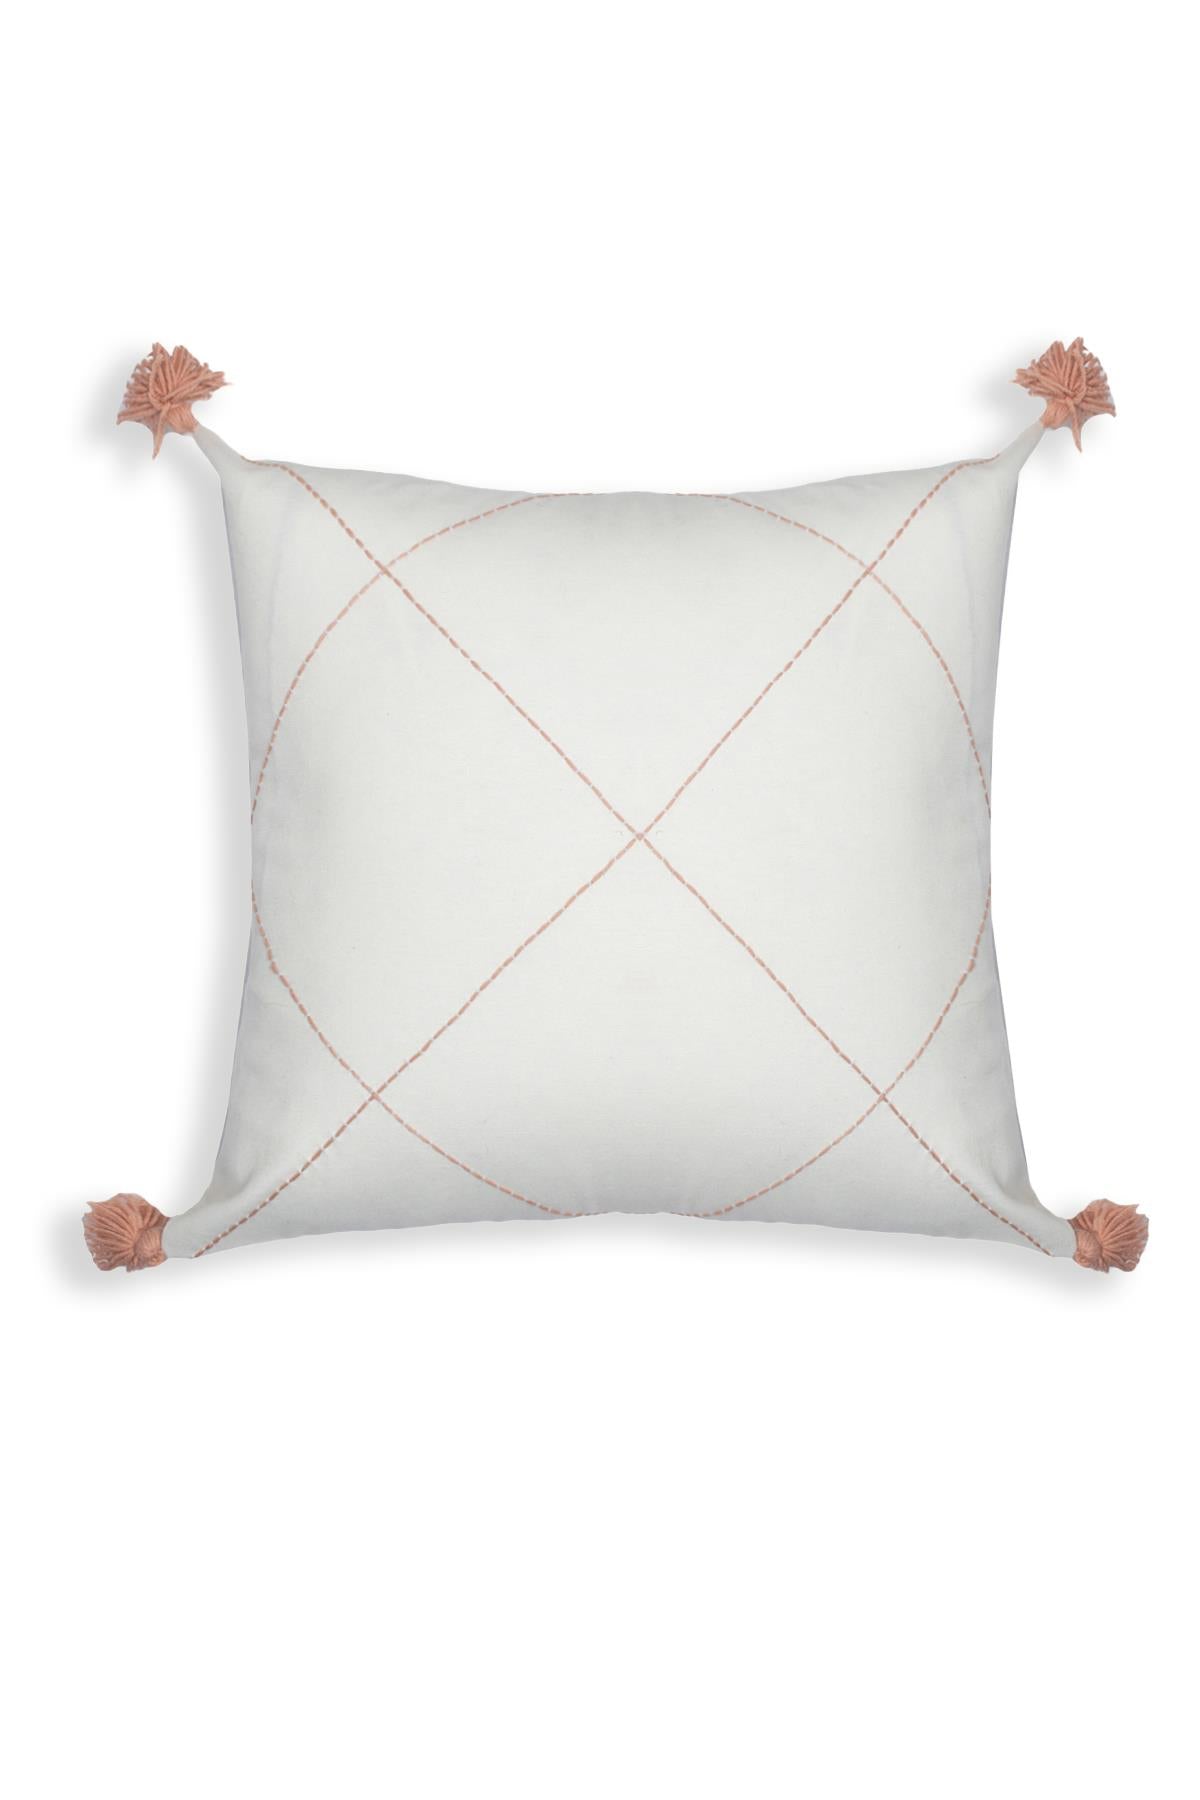 Embroidered Throw Pillow Cover Orange